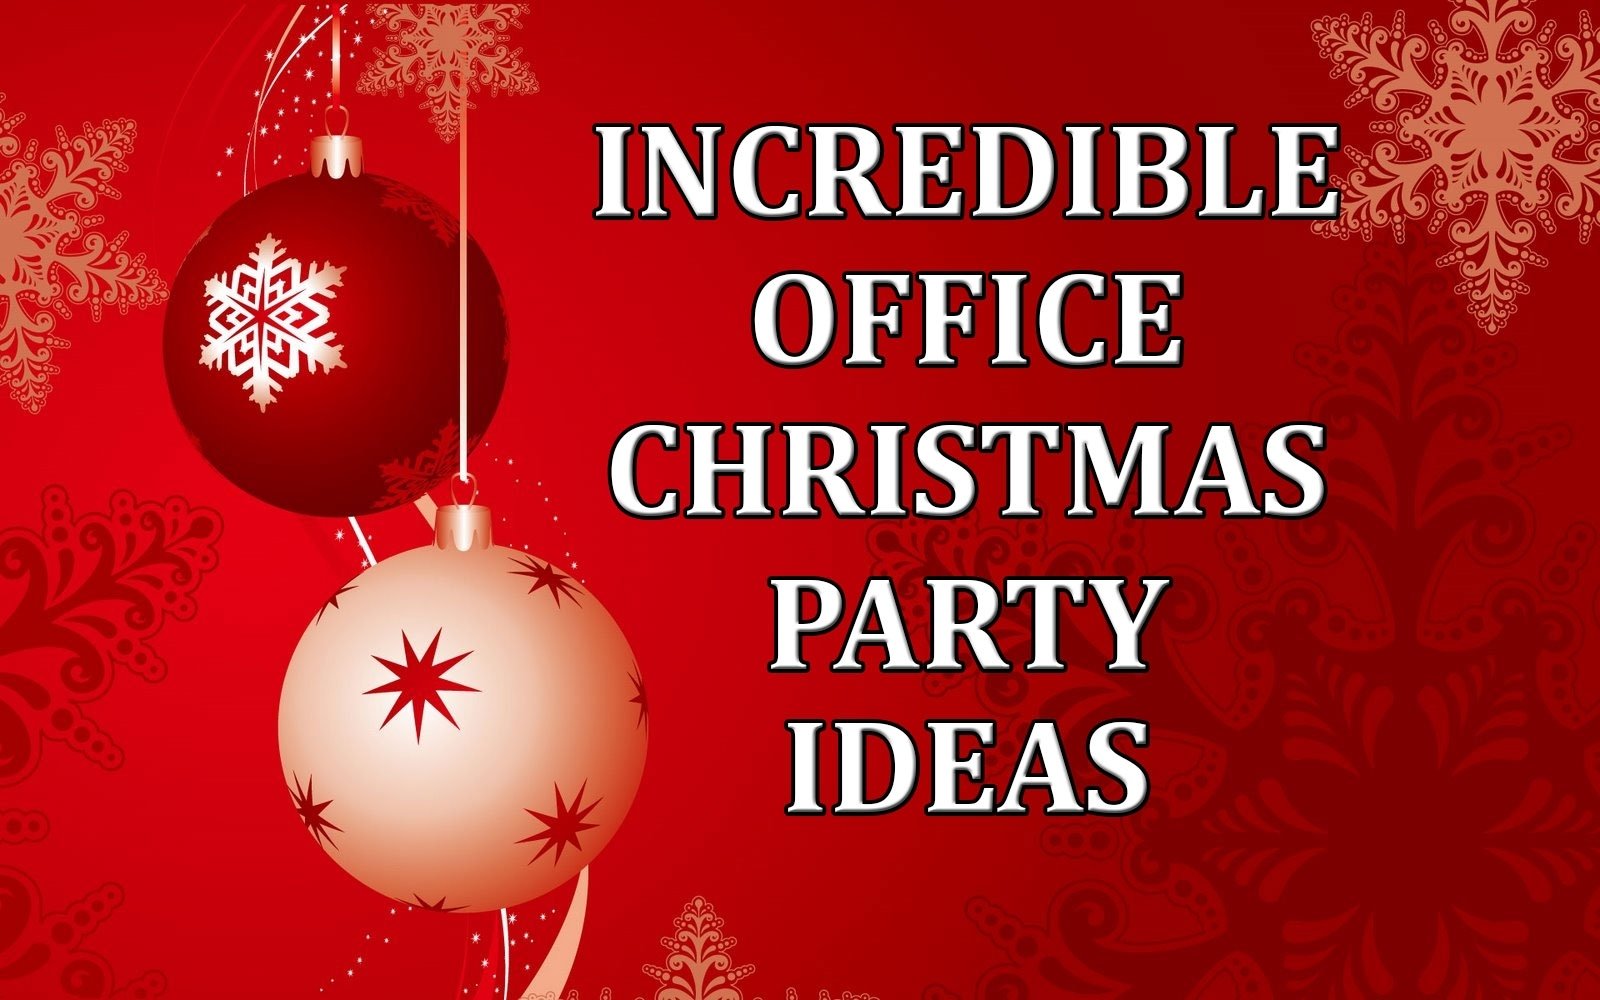 10 Attractive Corporate Holiday Party Entertainment Ideas incredible office christmas party ideas comedy ventriloquist 2 2024